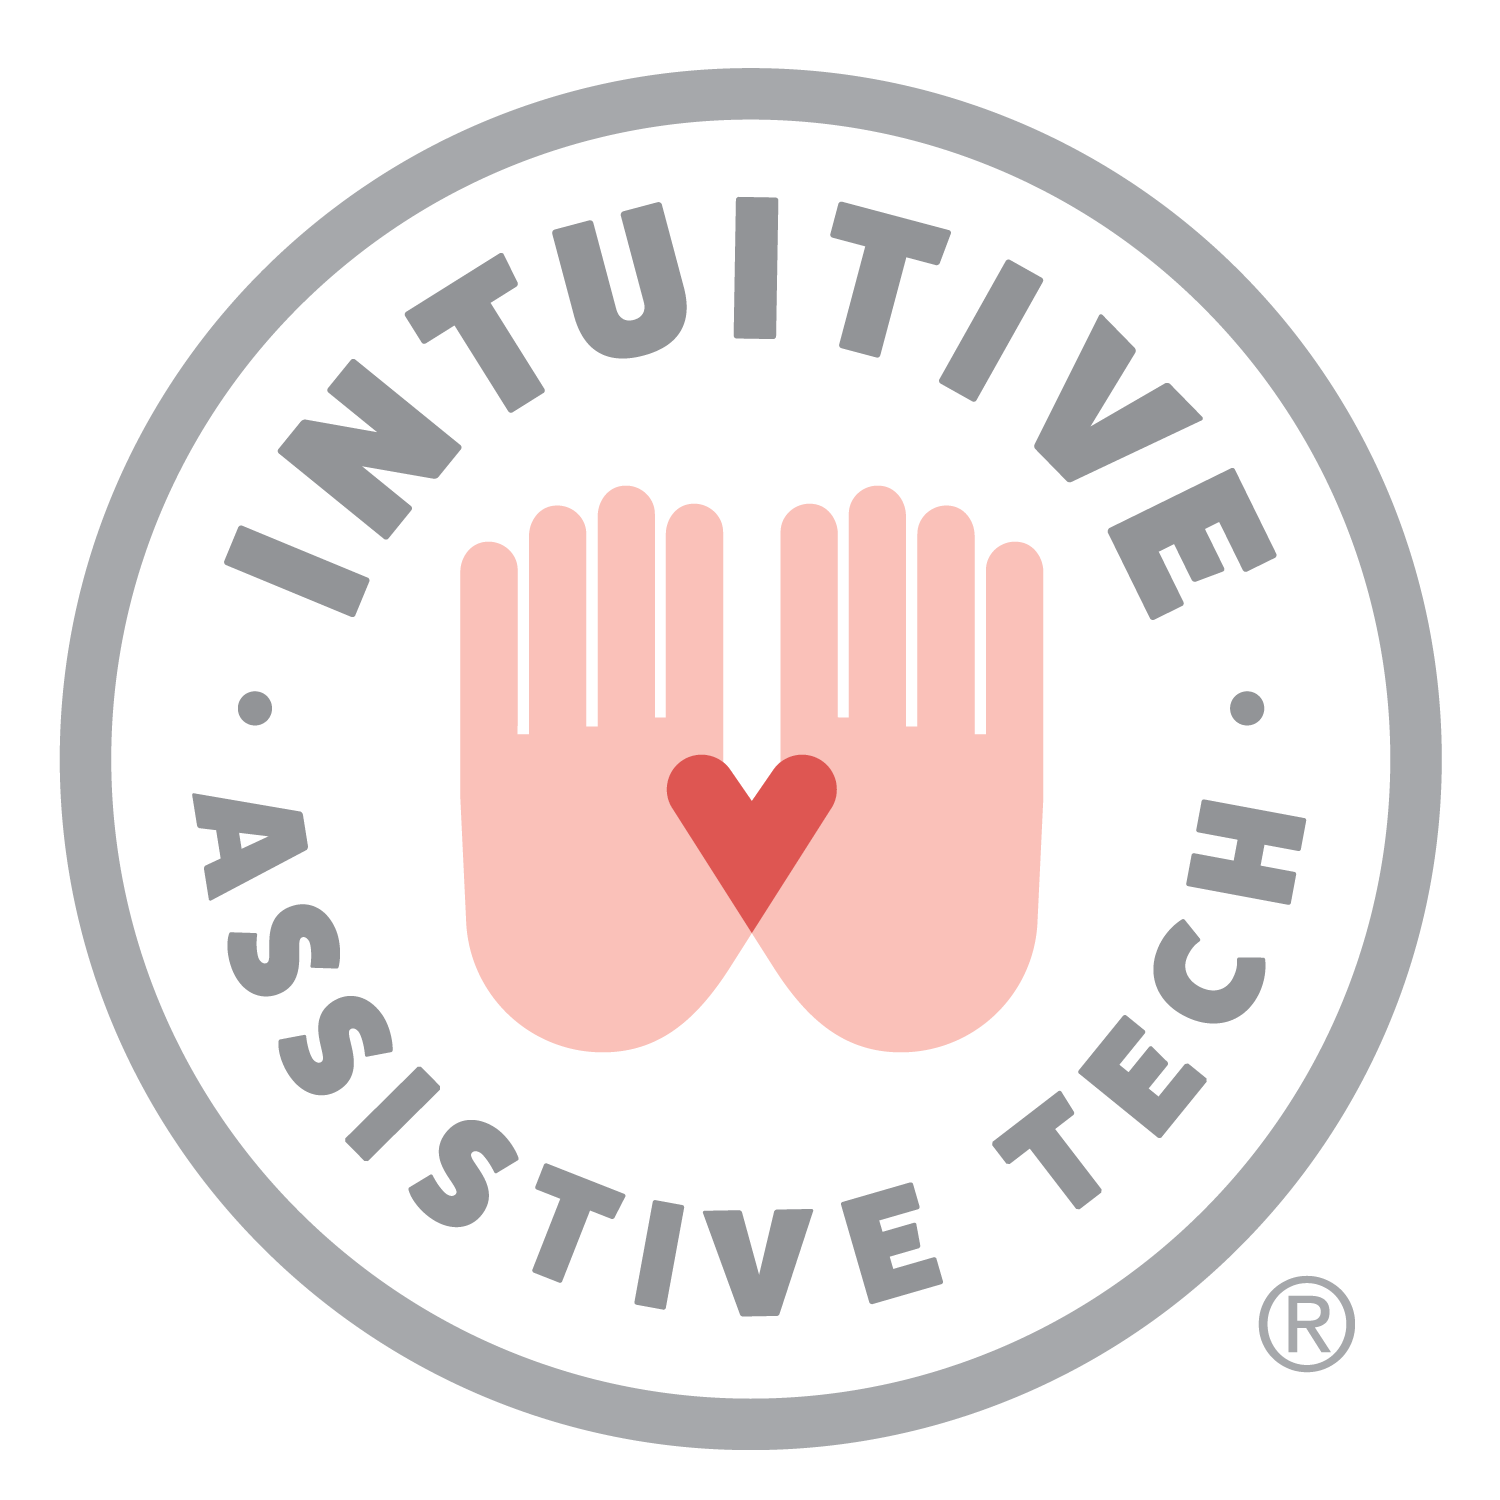 Intuitive Assistive Technology